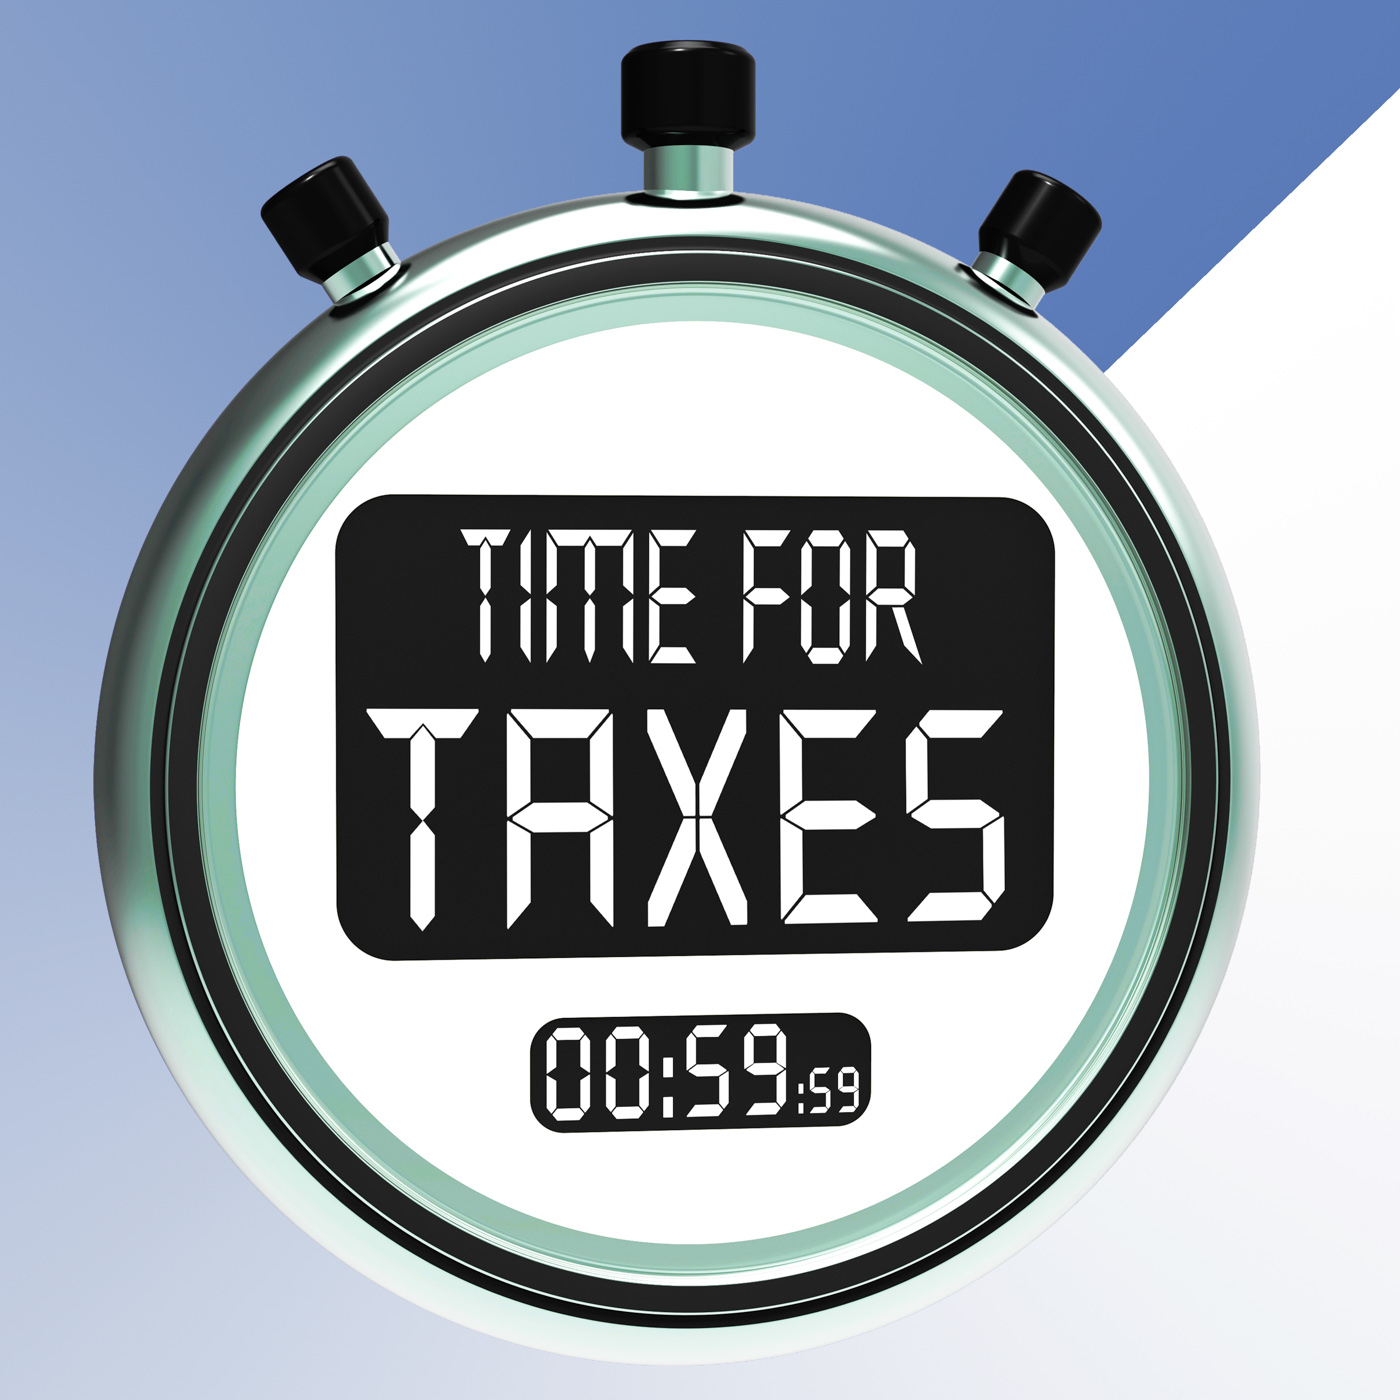 Time for taxes message meaning taxation due photo